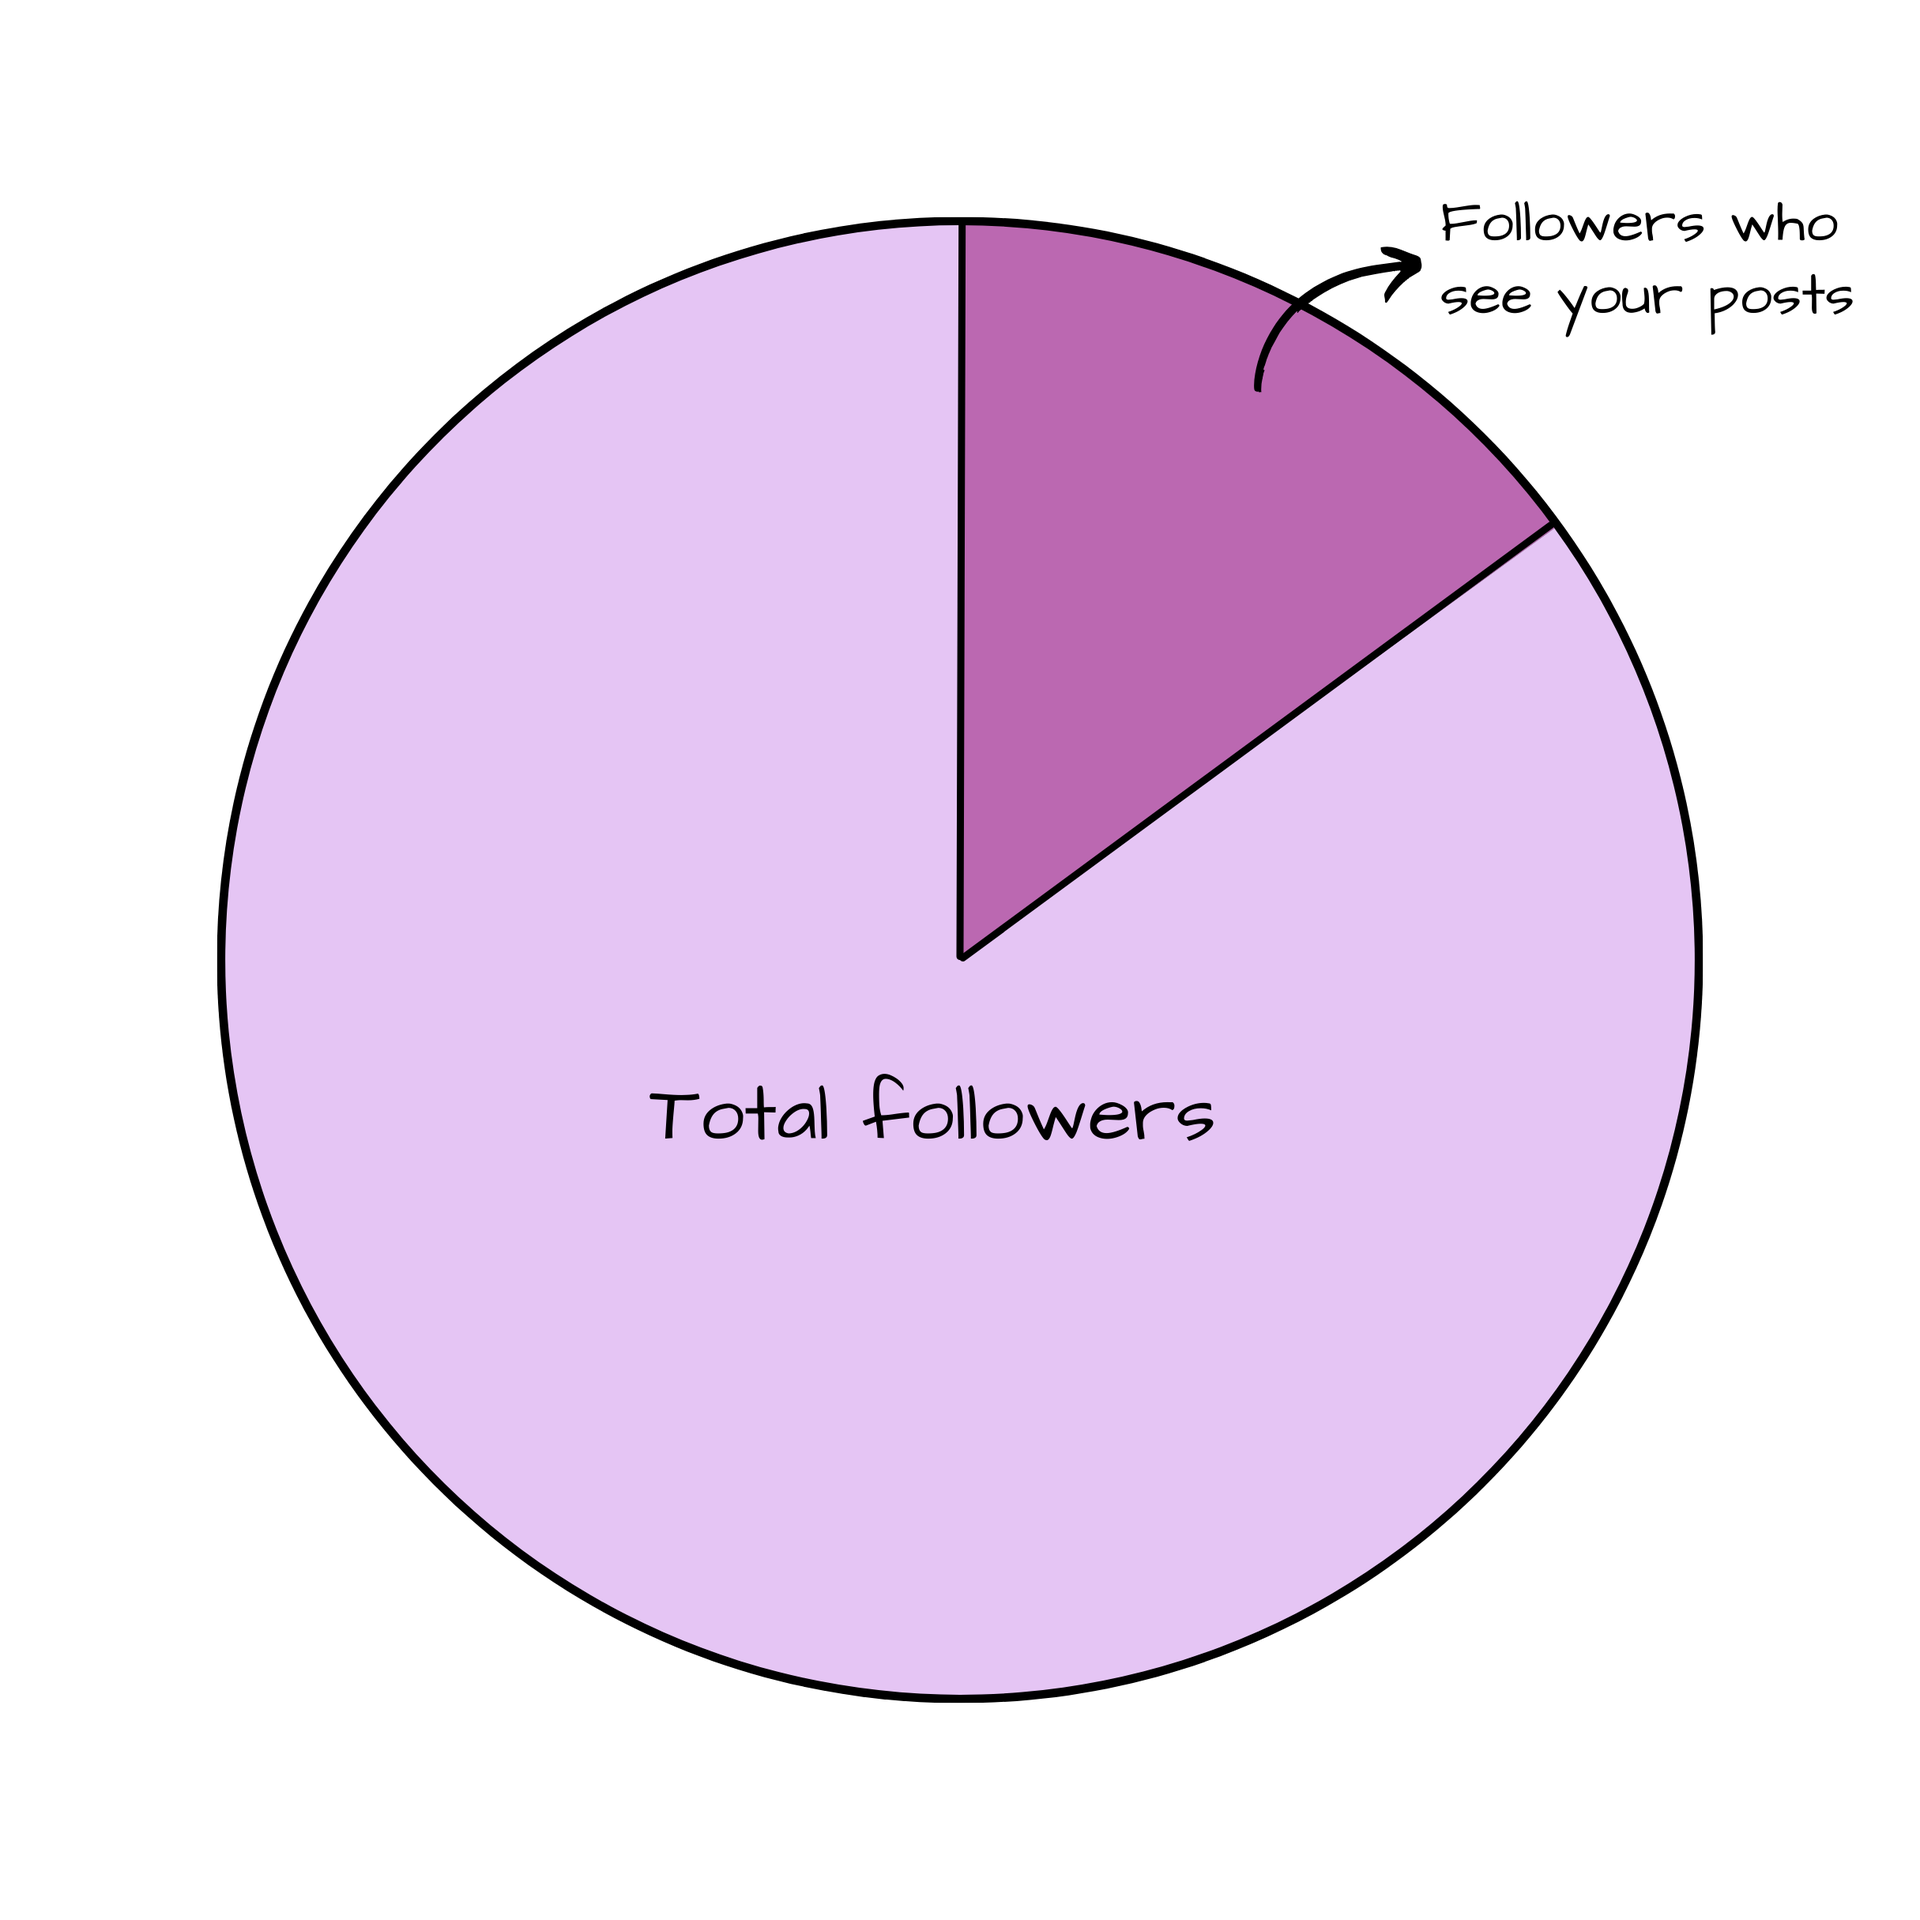 Percentage of followers who see your posts visualized in pie graph